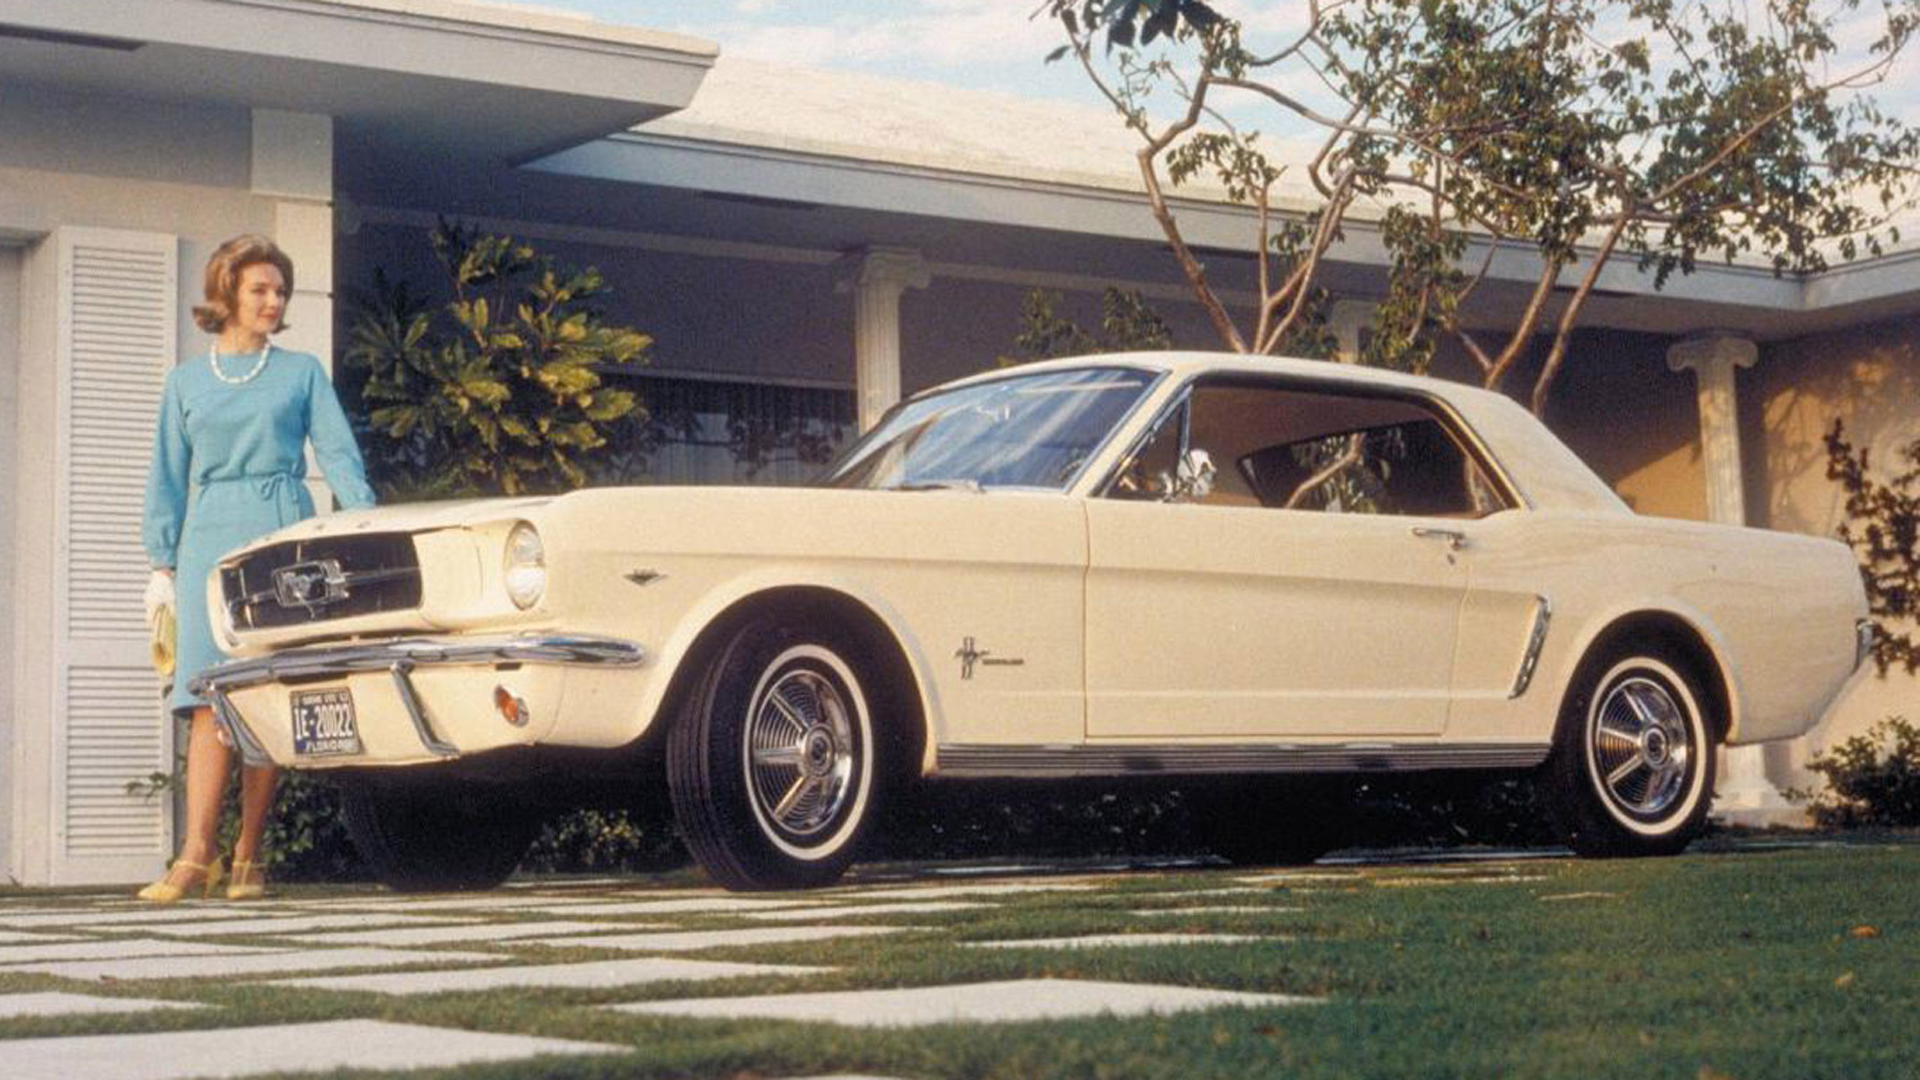 Ford Mustang: a vision